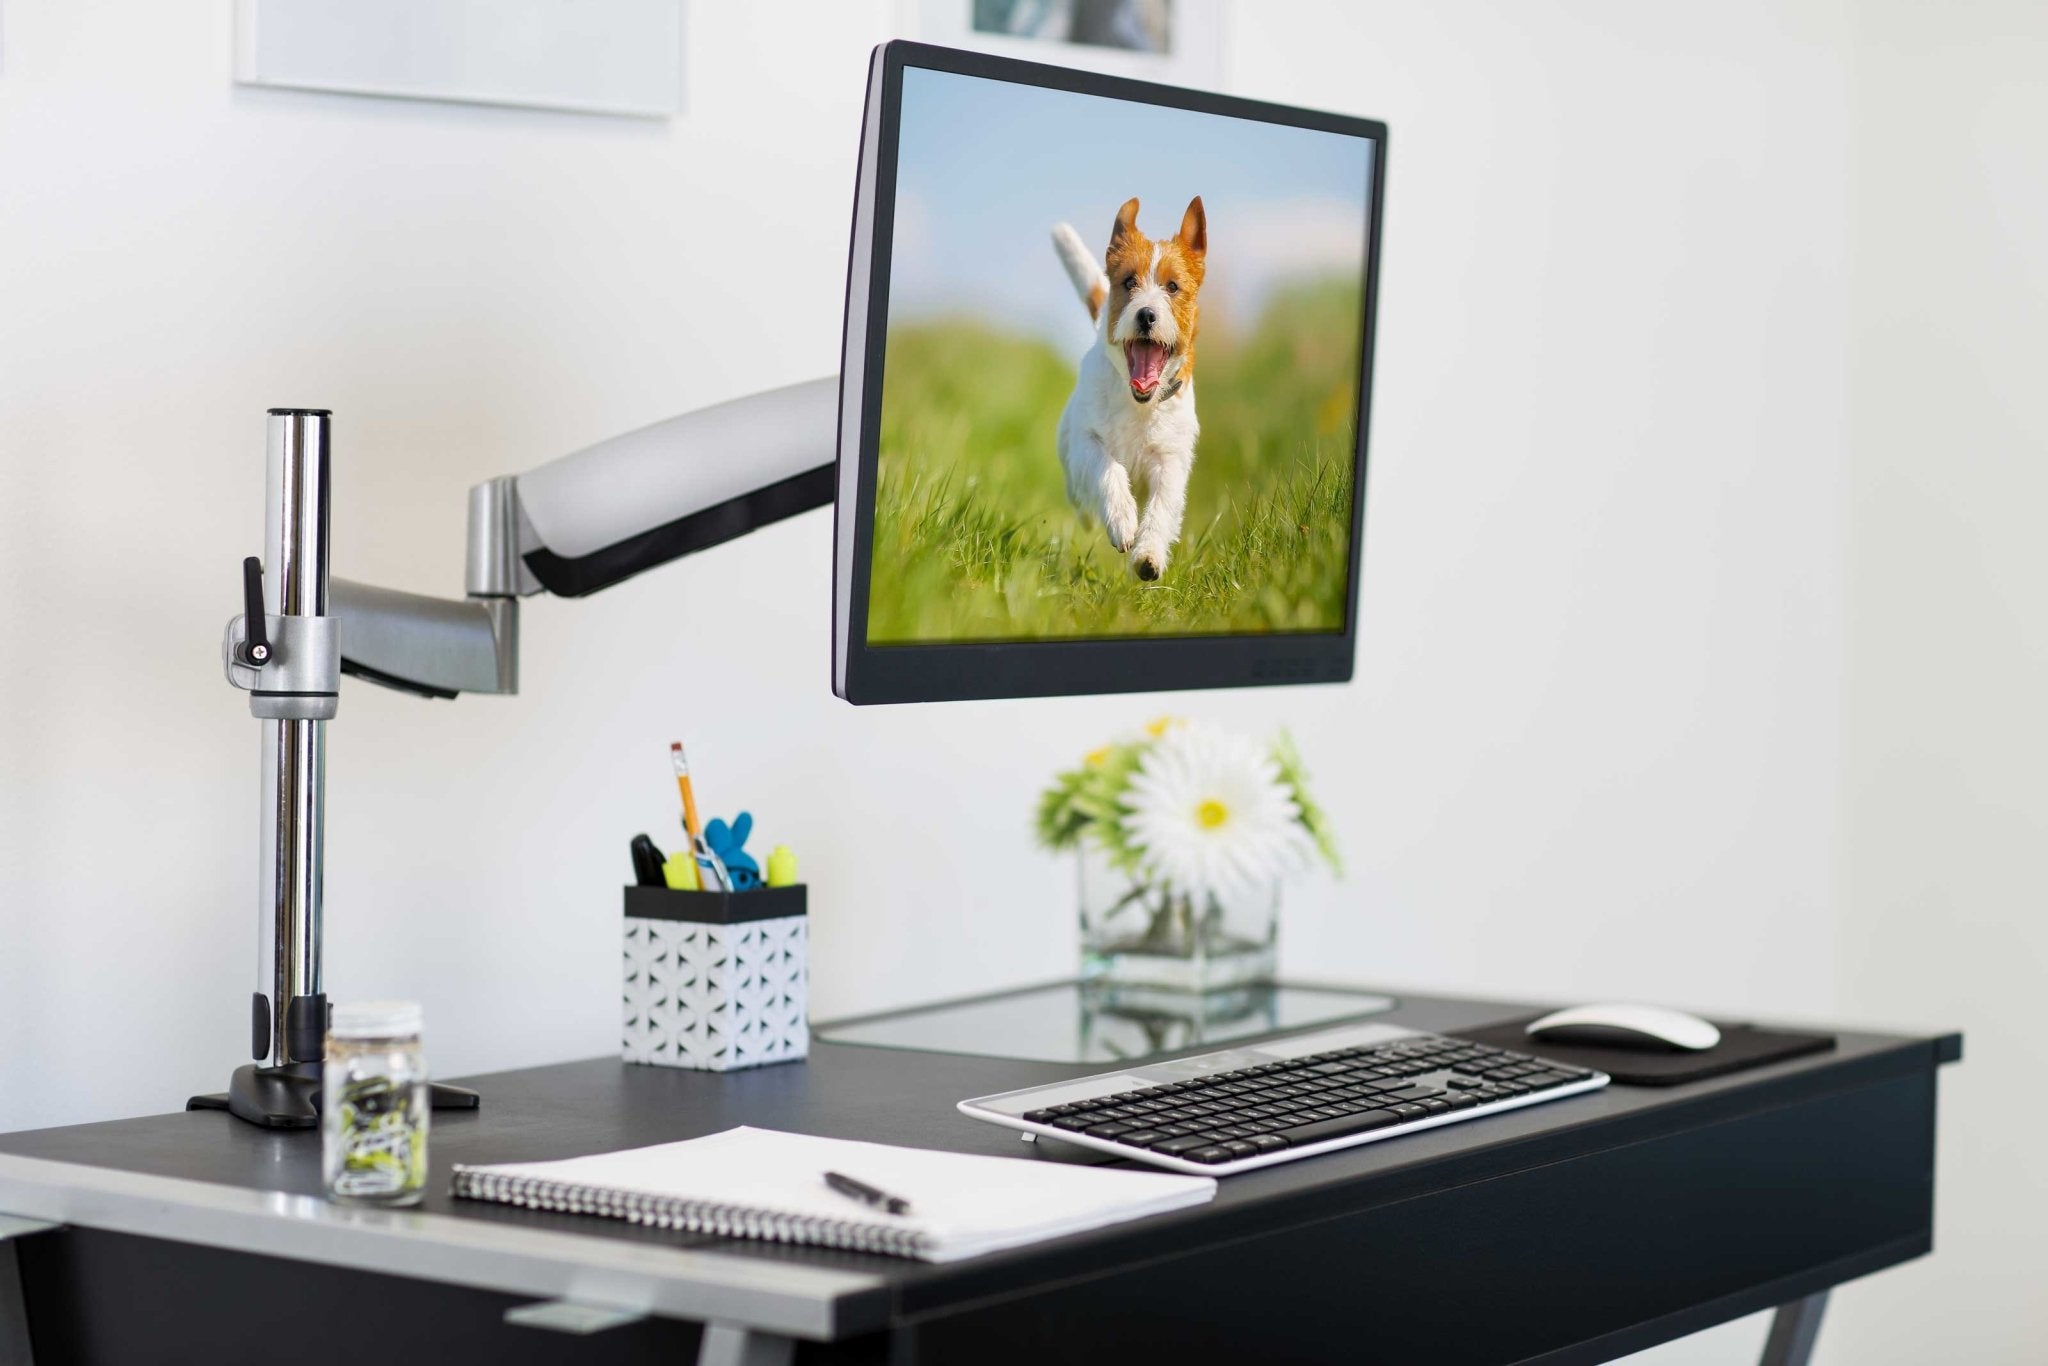 3 ways to convert any desk into a standing desk - CNET